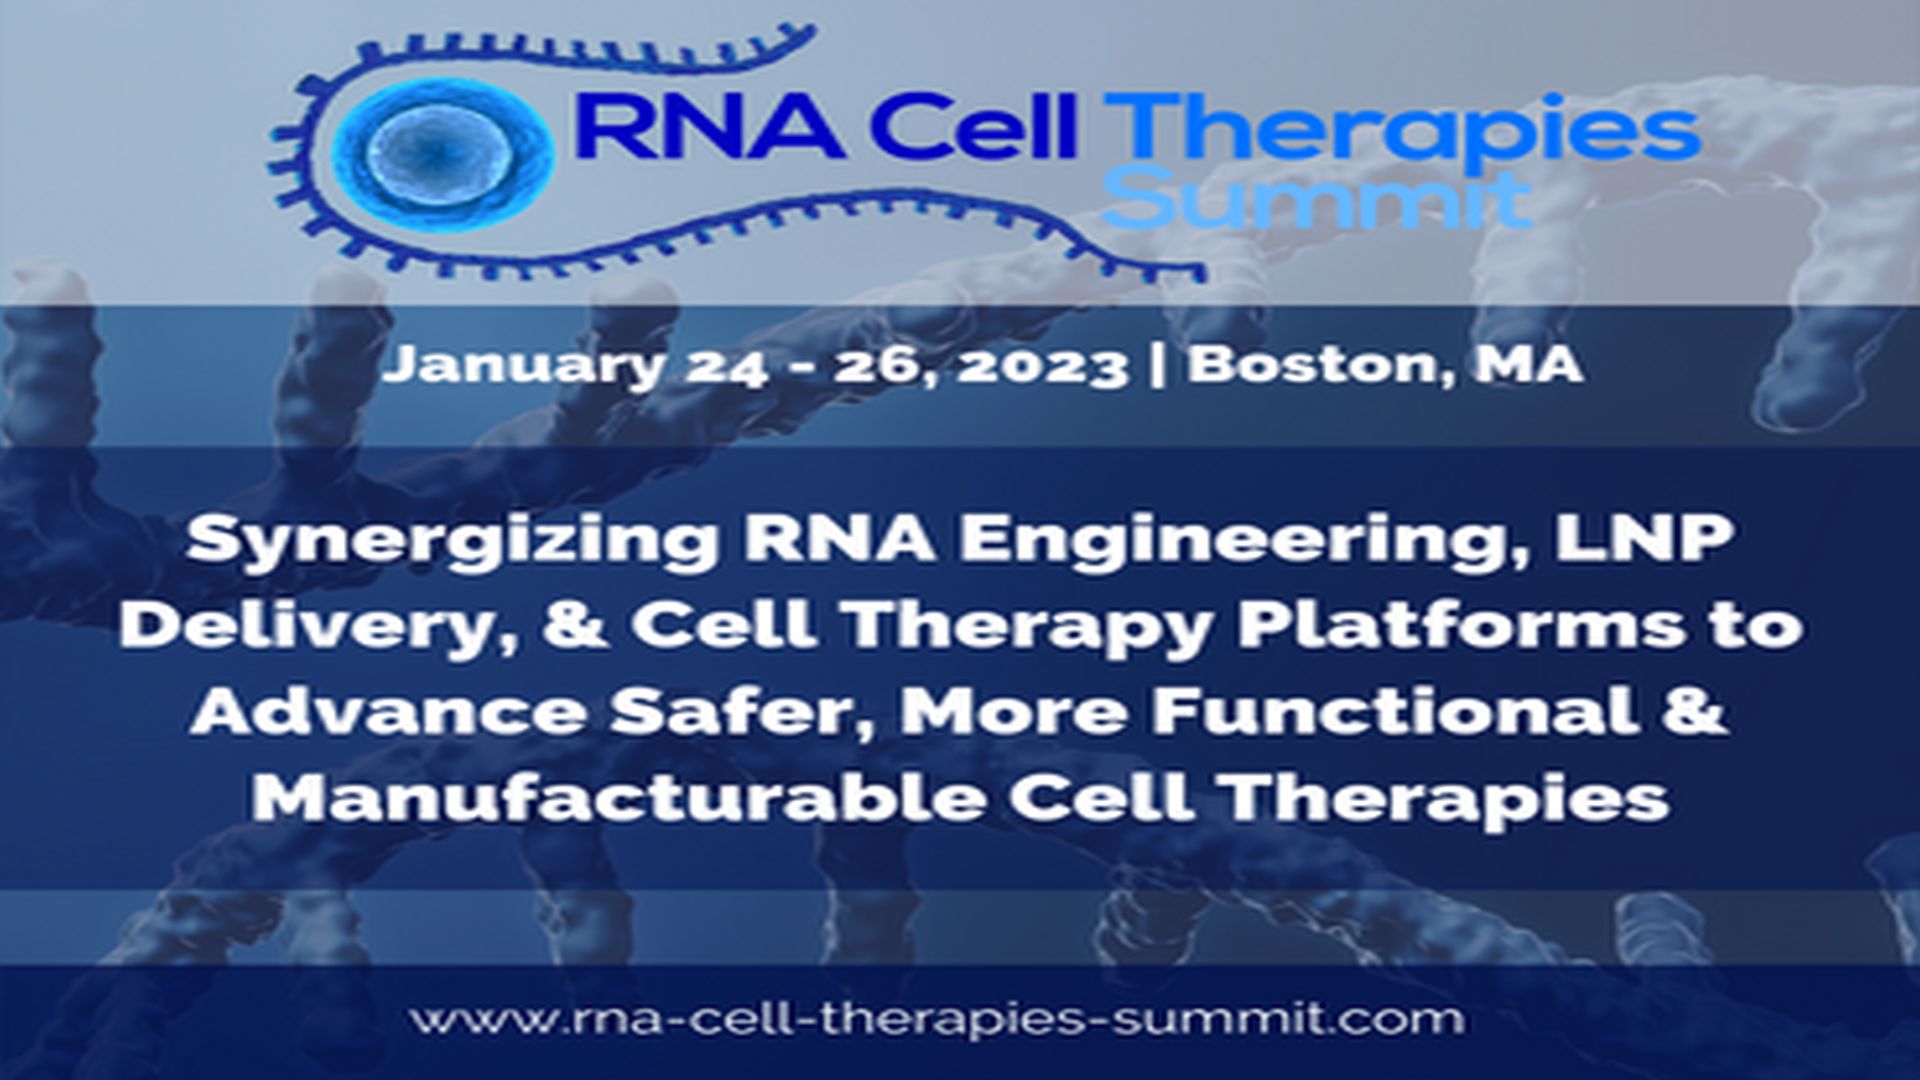 RNA Cell Therapies Summit